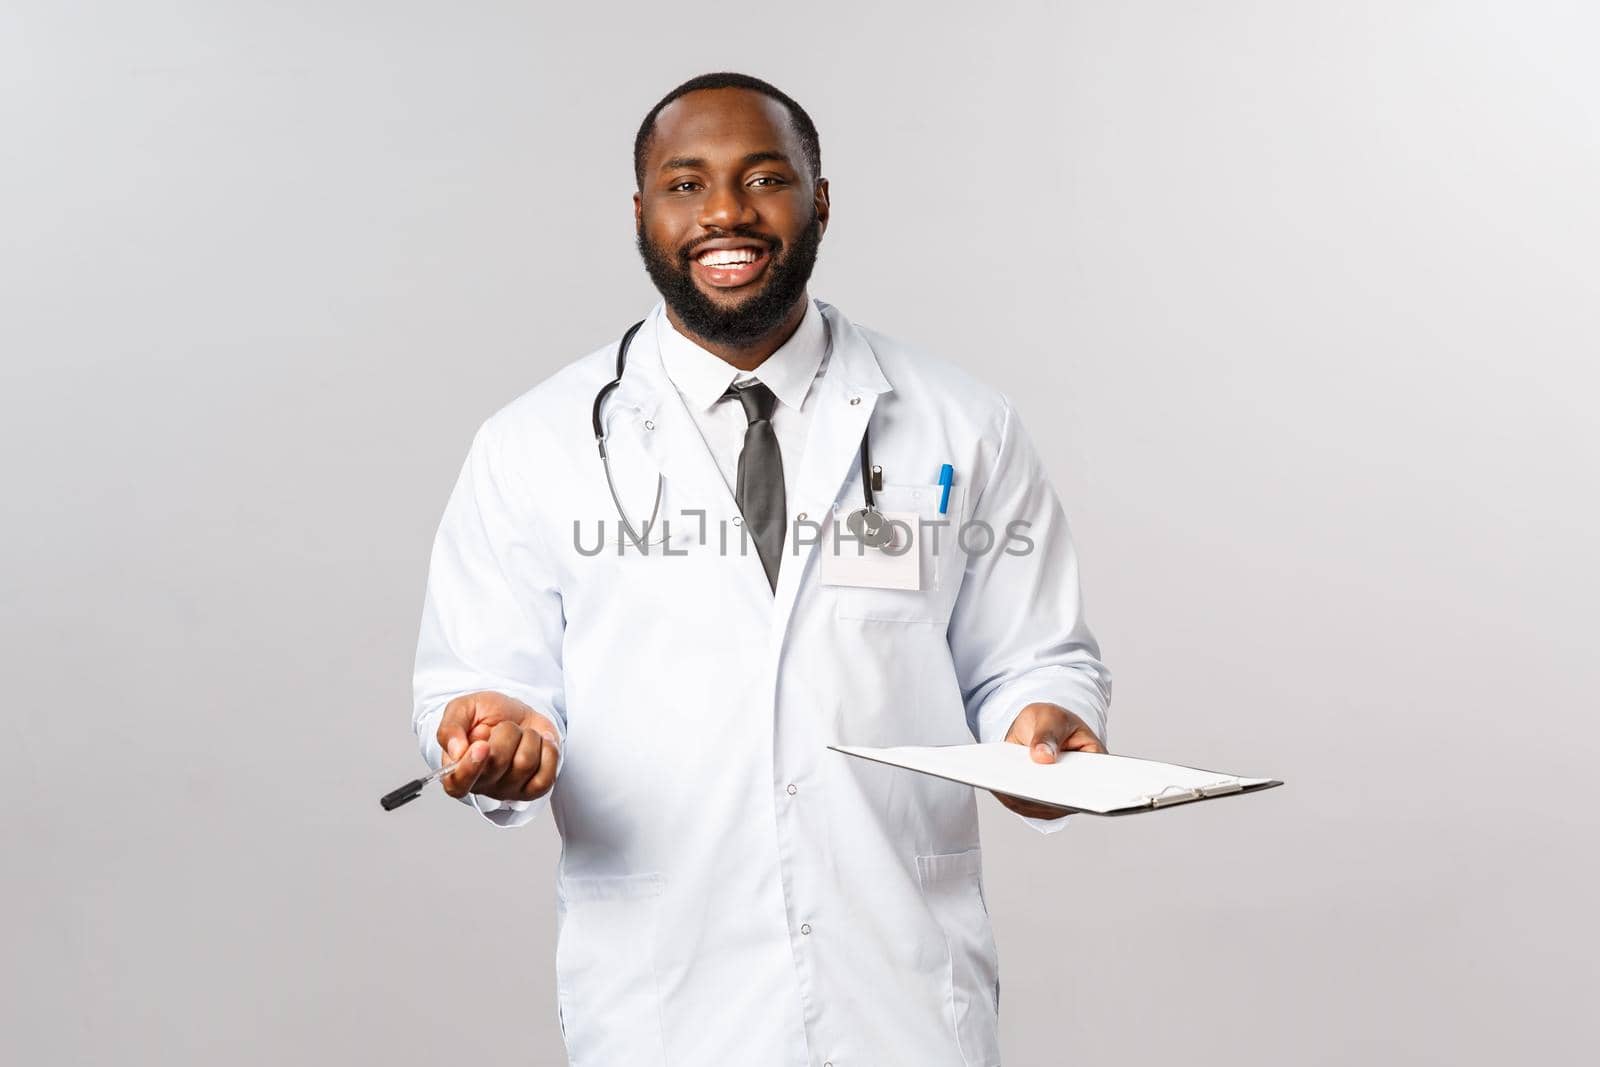 Medicine, covid19, treatment and hospital concept. Happy friendly african-american doctor, physician treating patient, have check-up in ambulance or hospital, smiling hold clipboard.